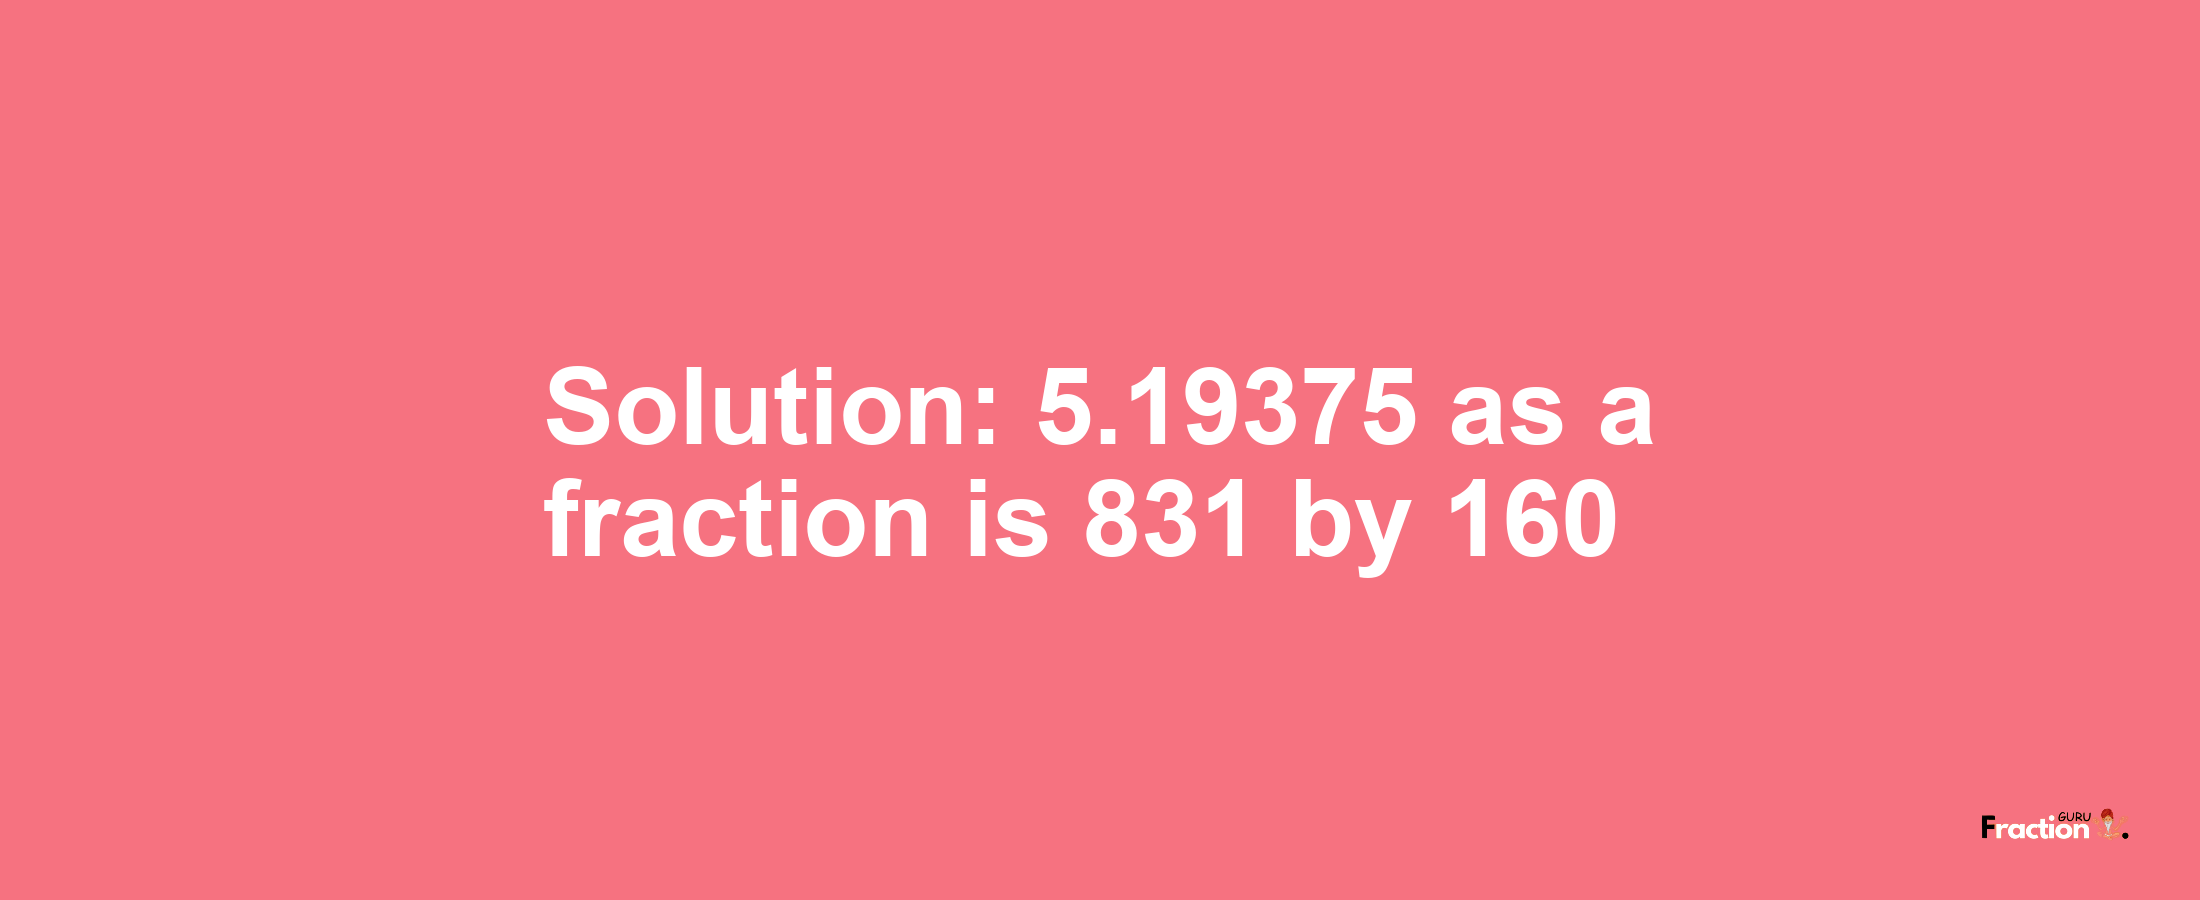 Solution:5.19375 as a fraction is 831/160